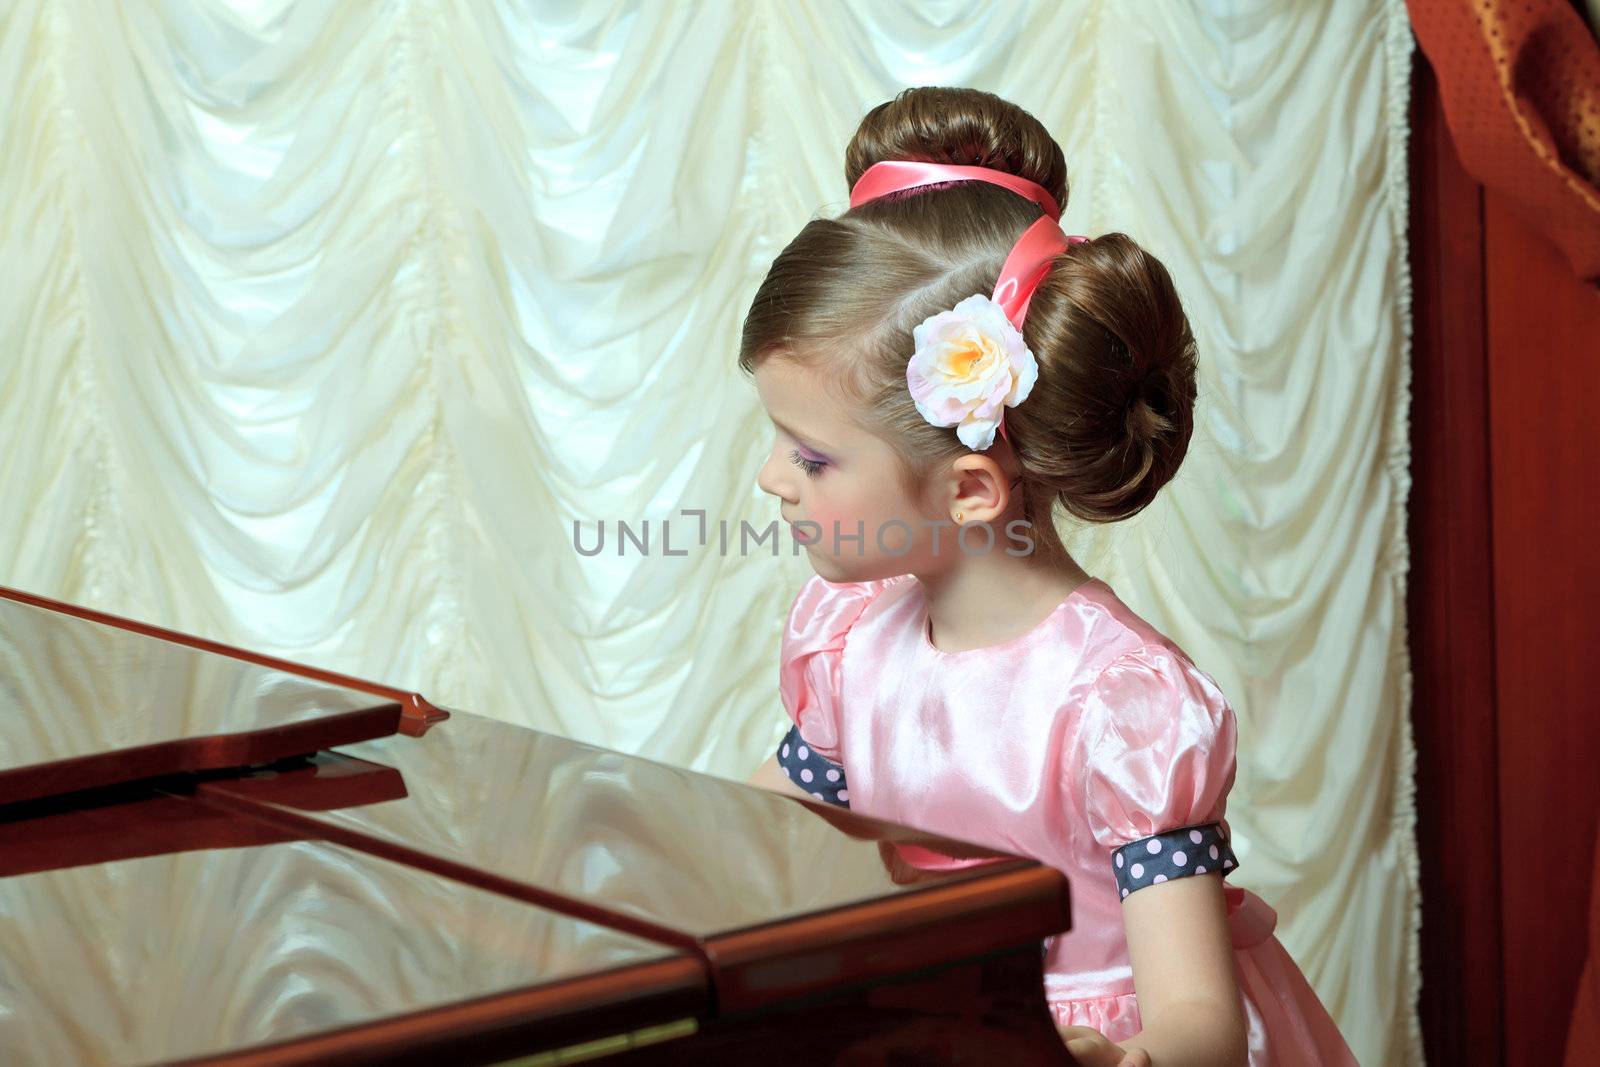 The girl in pink plays the piano